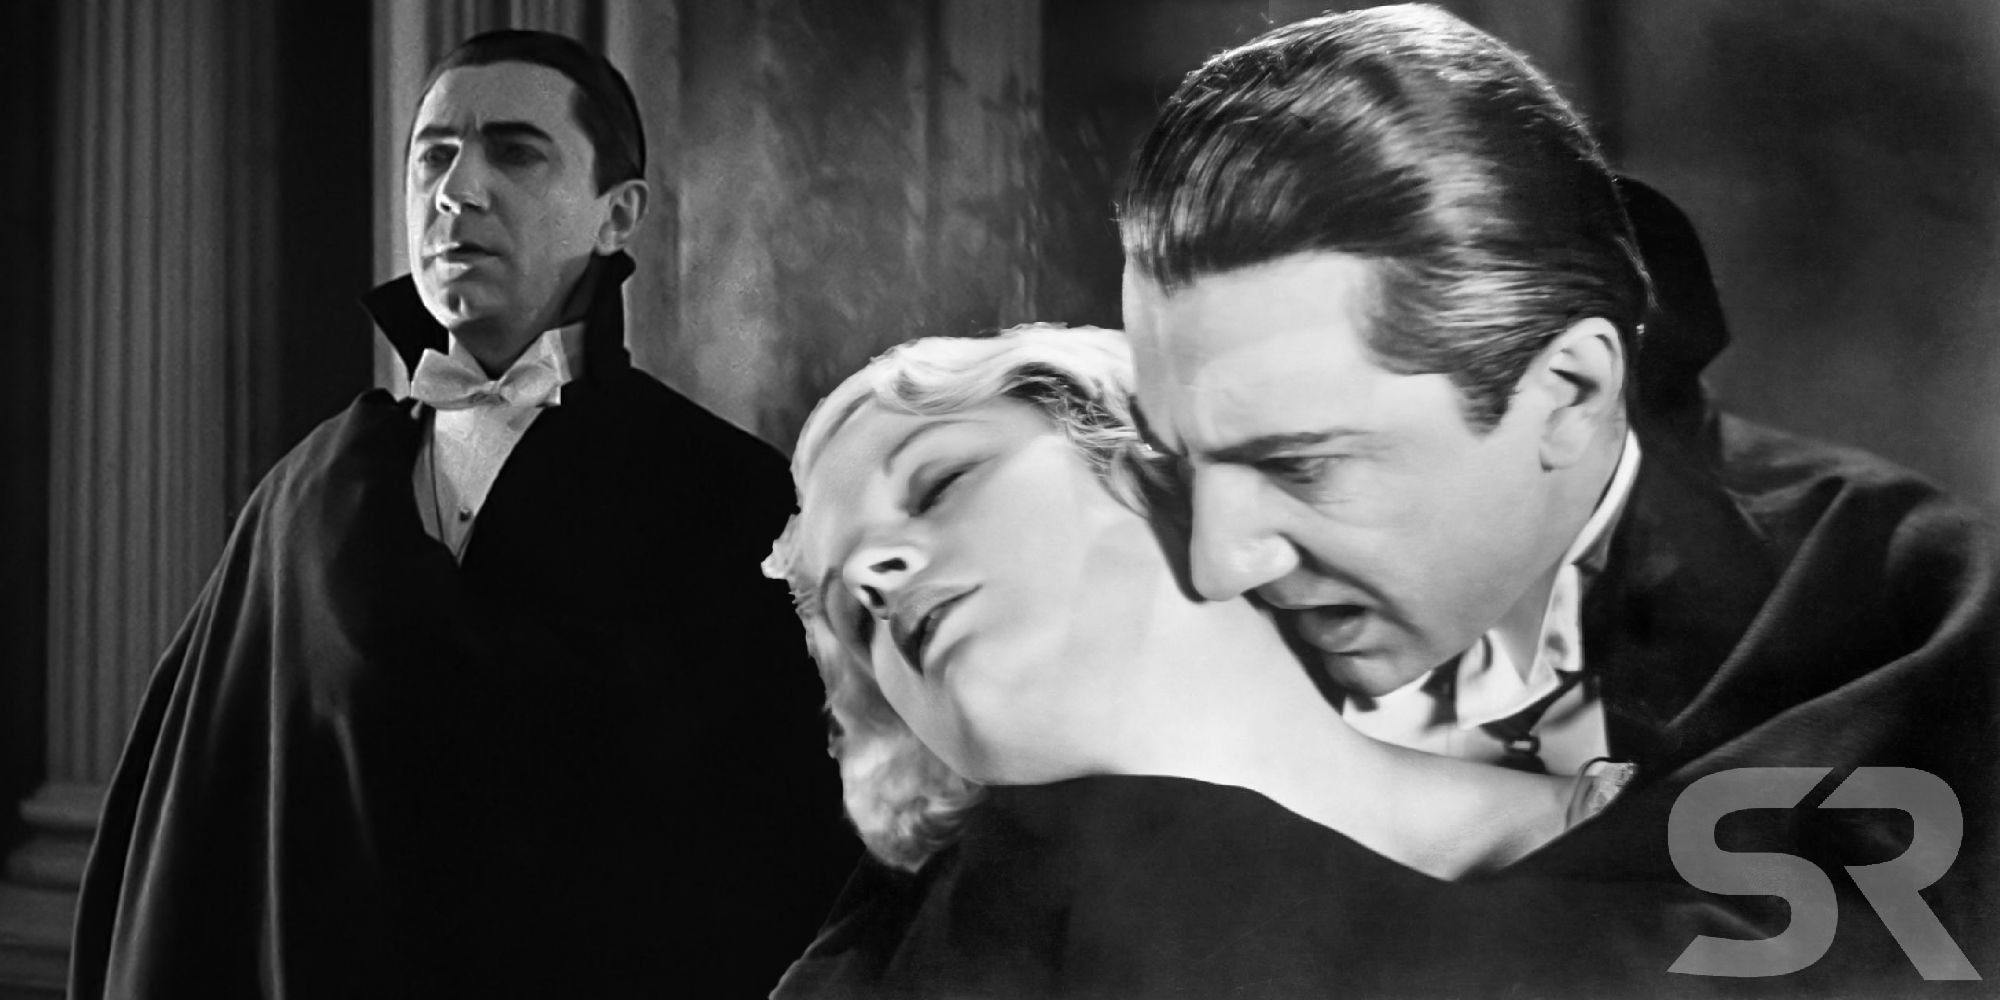 Every Universal Monsters Dracula Movie Ranked From Worst To Best